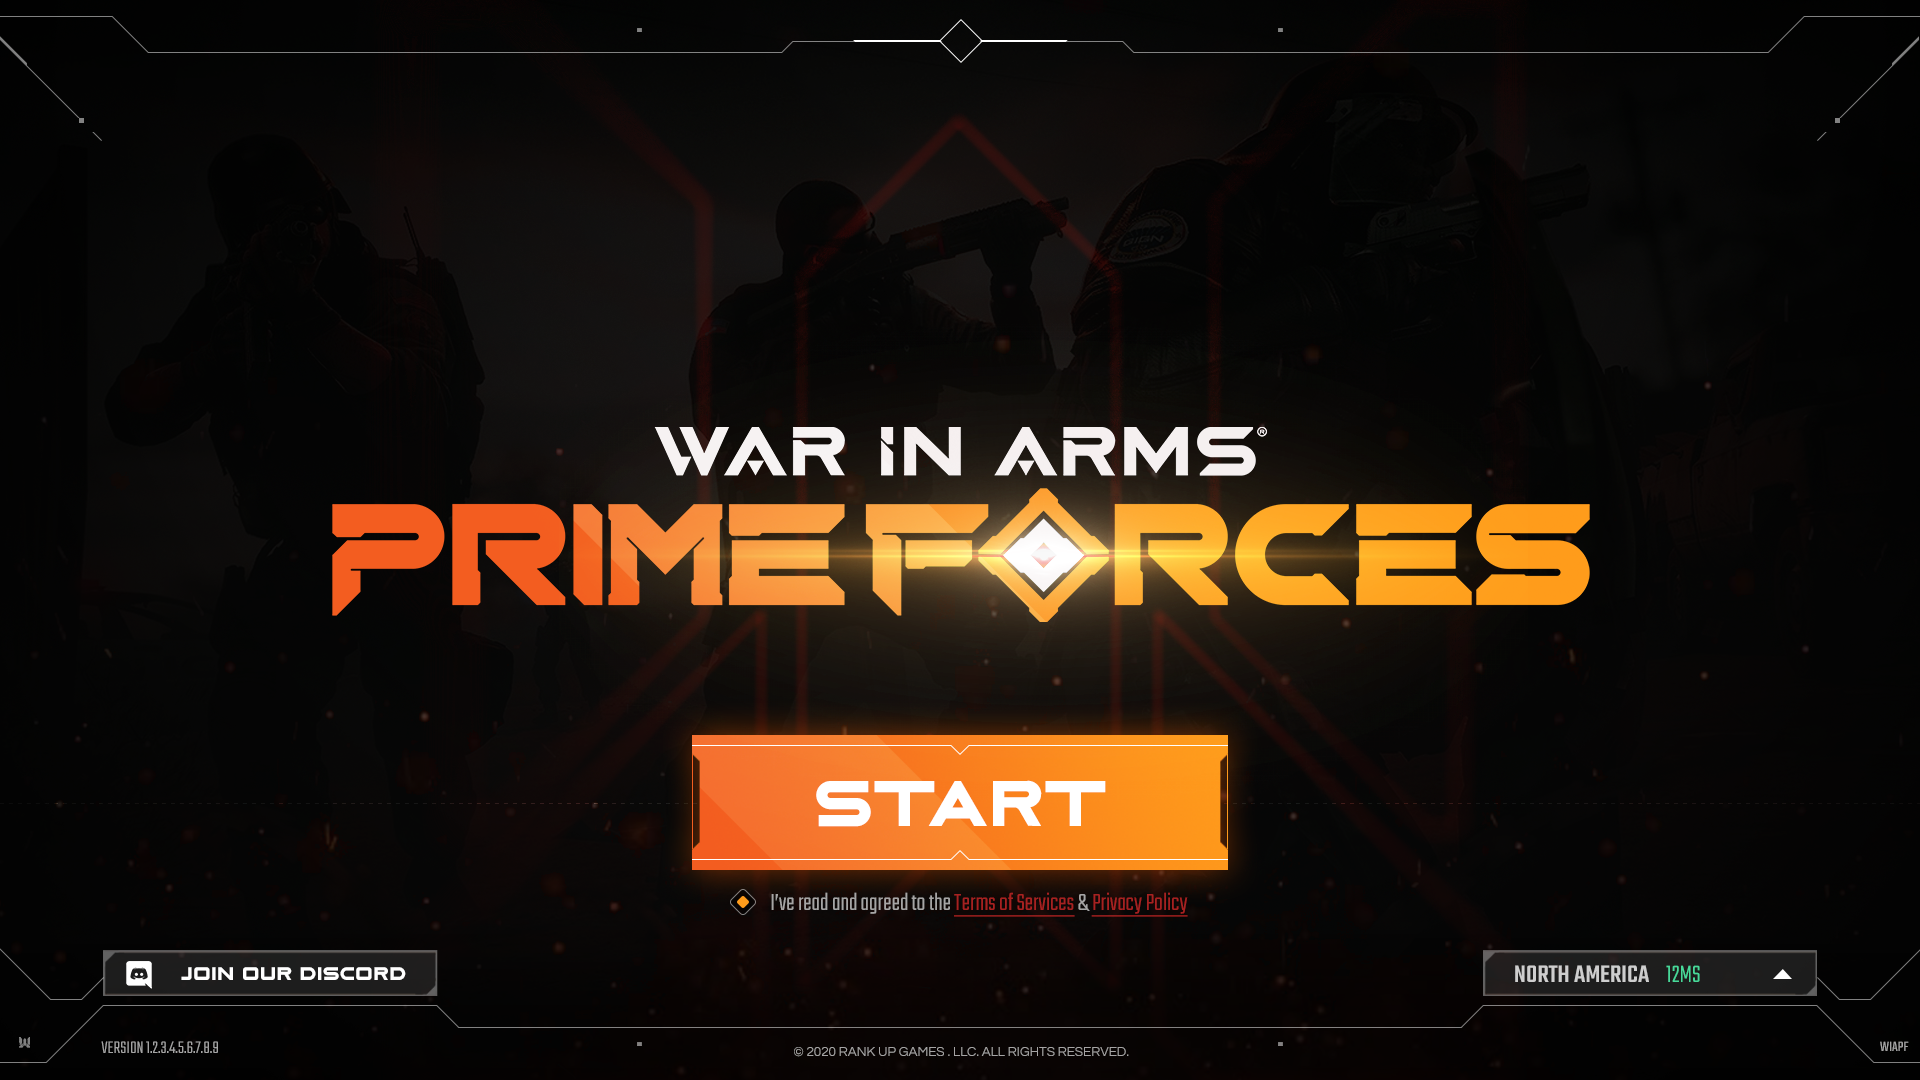 WAR IN ARMS: PRIME FORCES CQB screenshot game